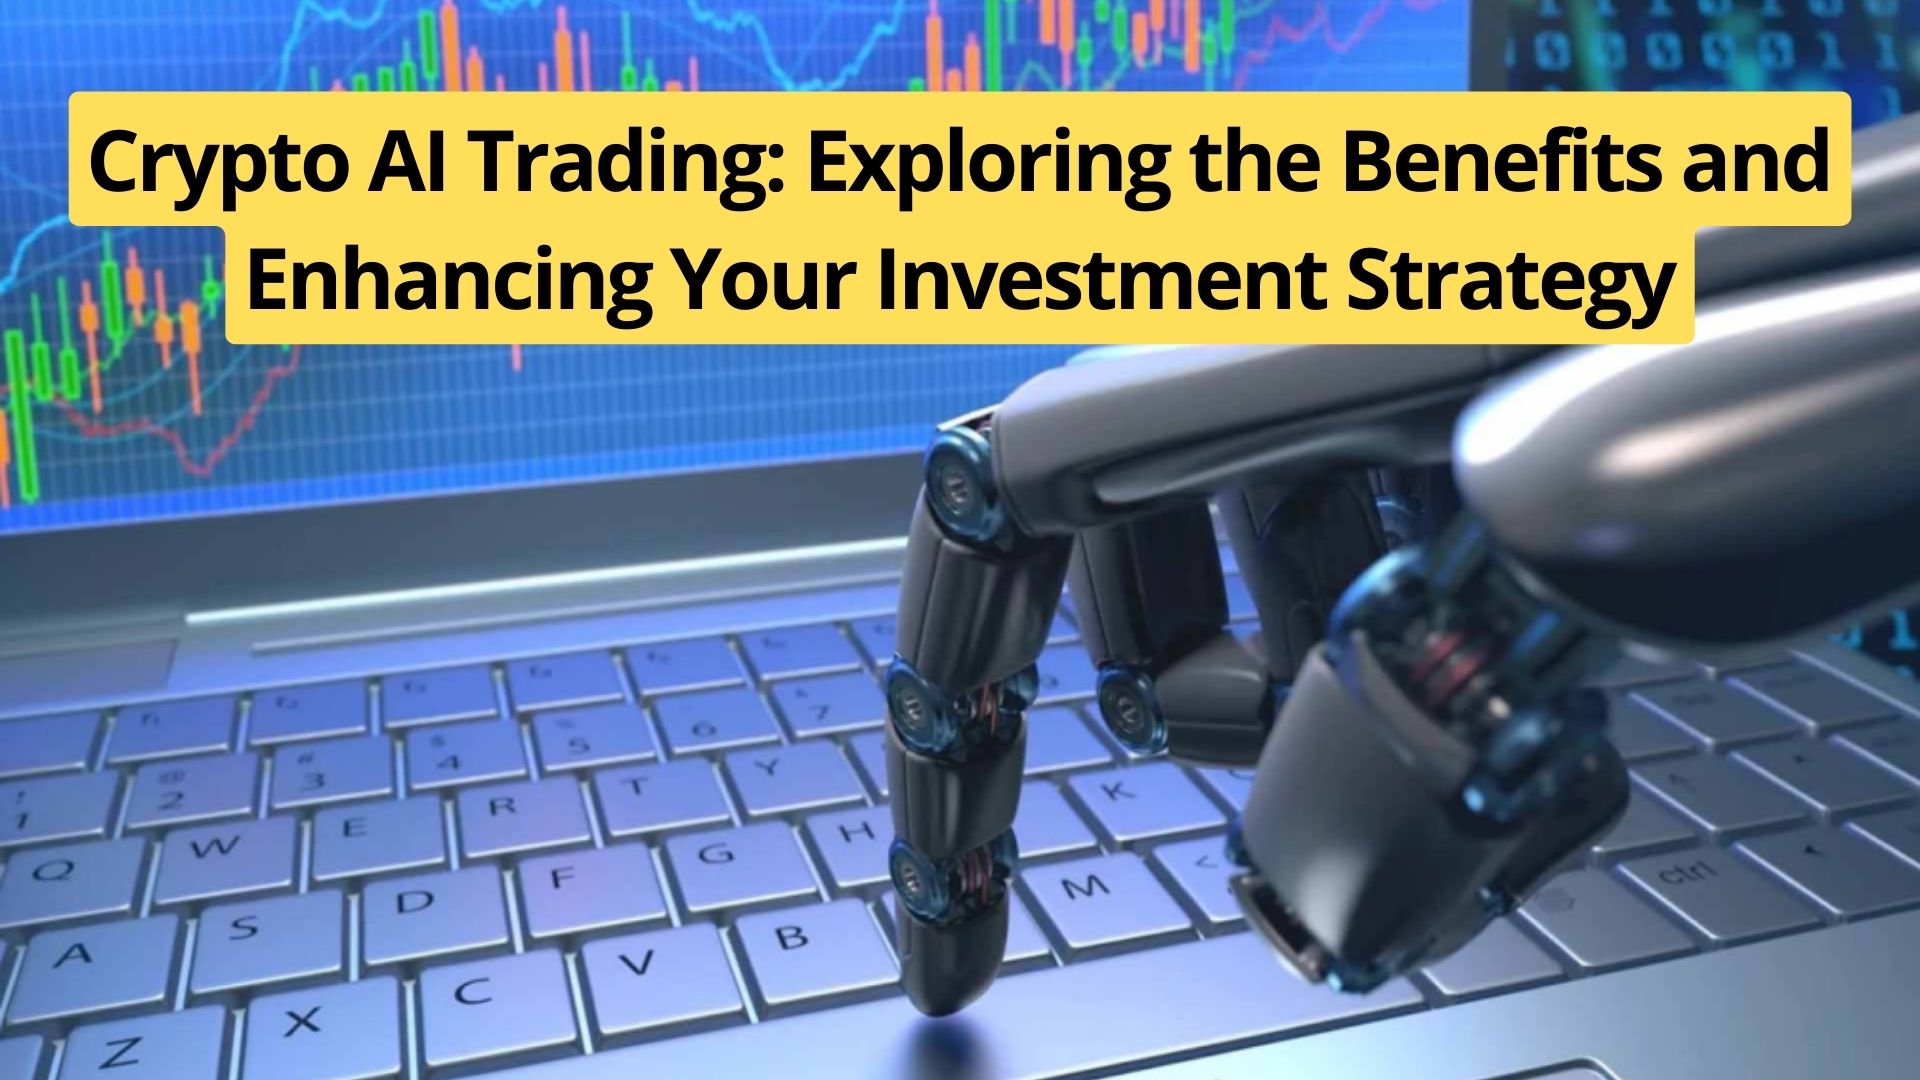 Crypto AI Trading: Exploring the Benefits and Enhancing Your Investment Strategy